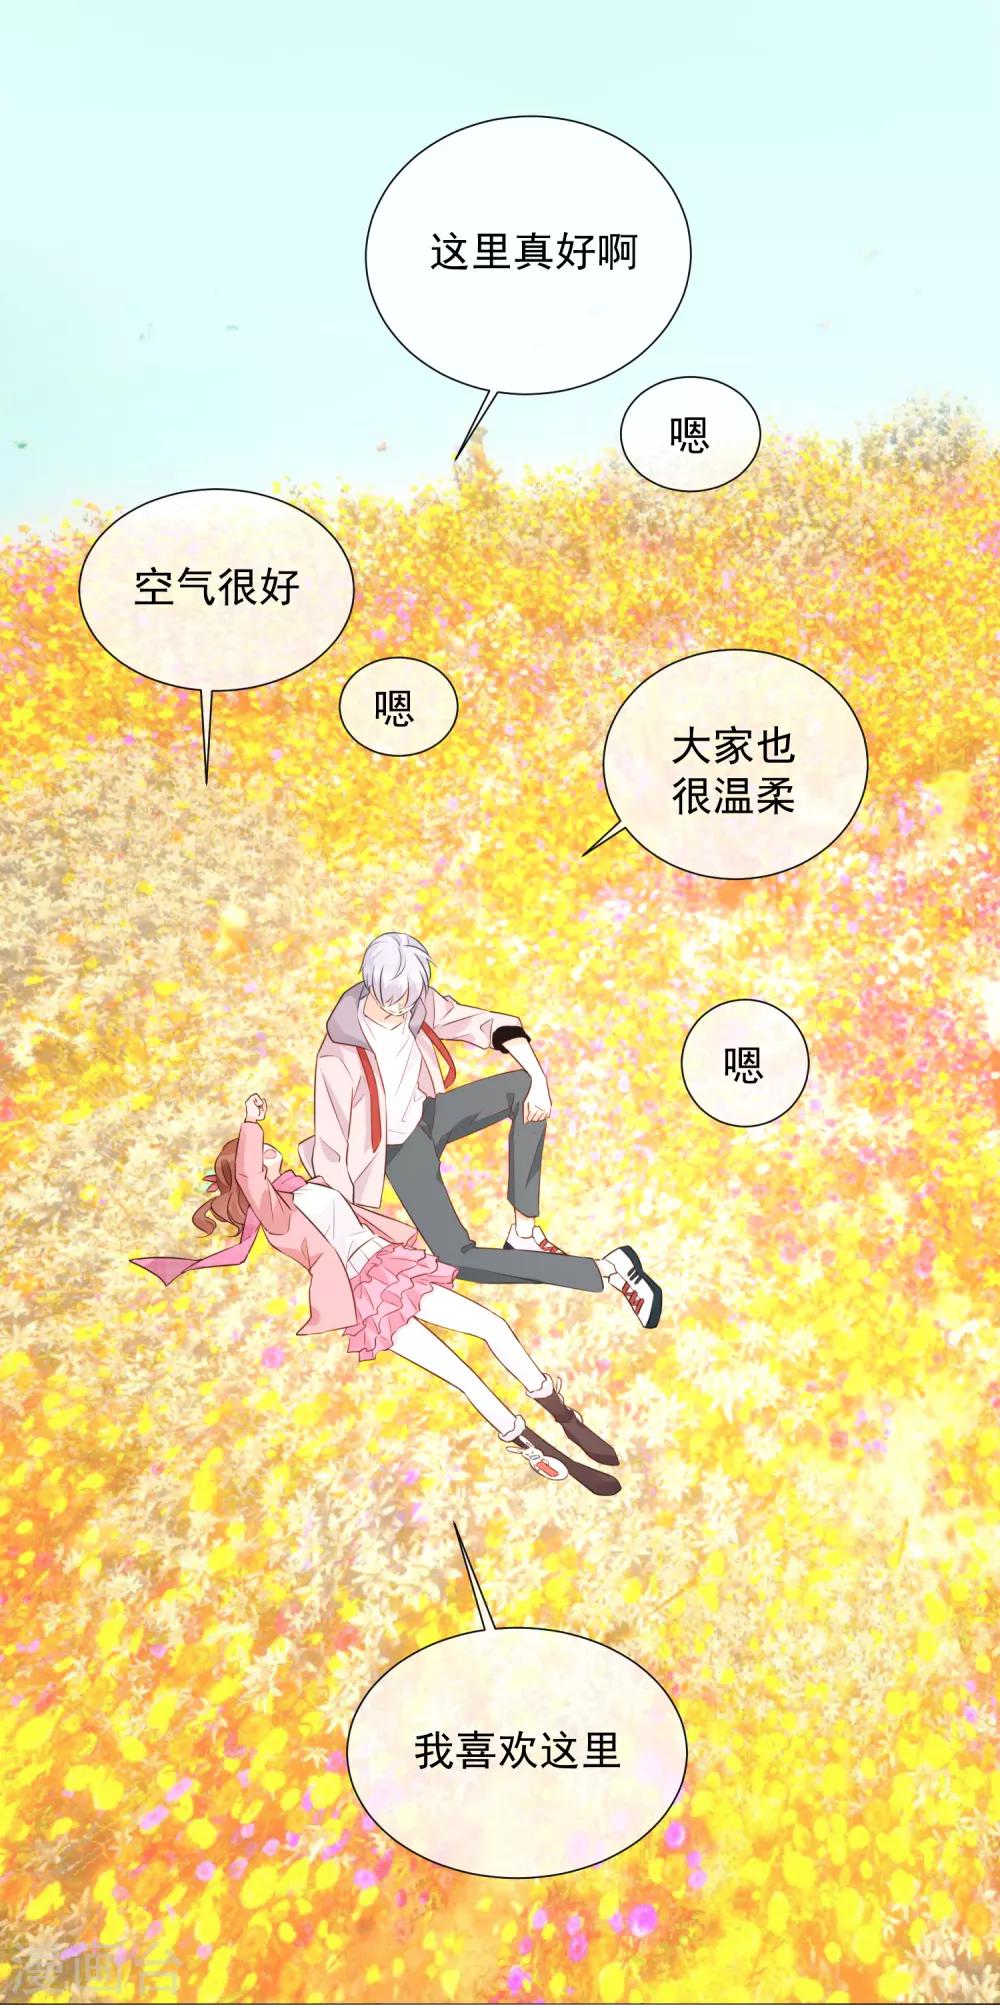 One Kiss A Day - 第86話 夫妻生活 - 5